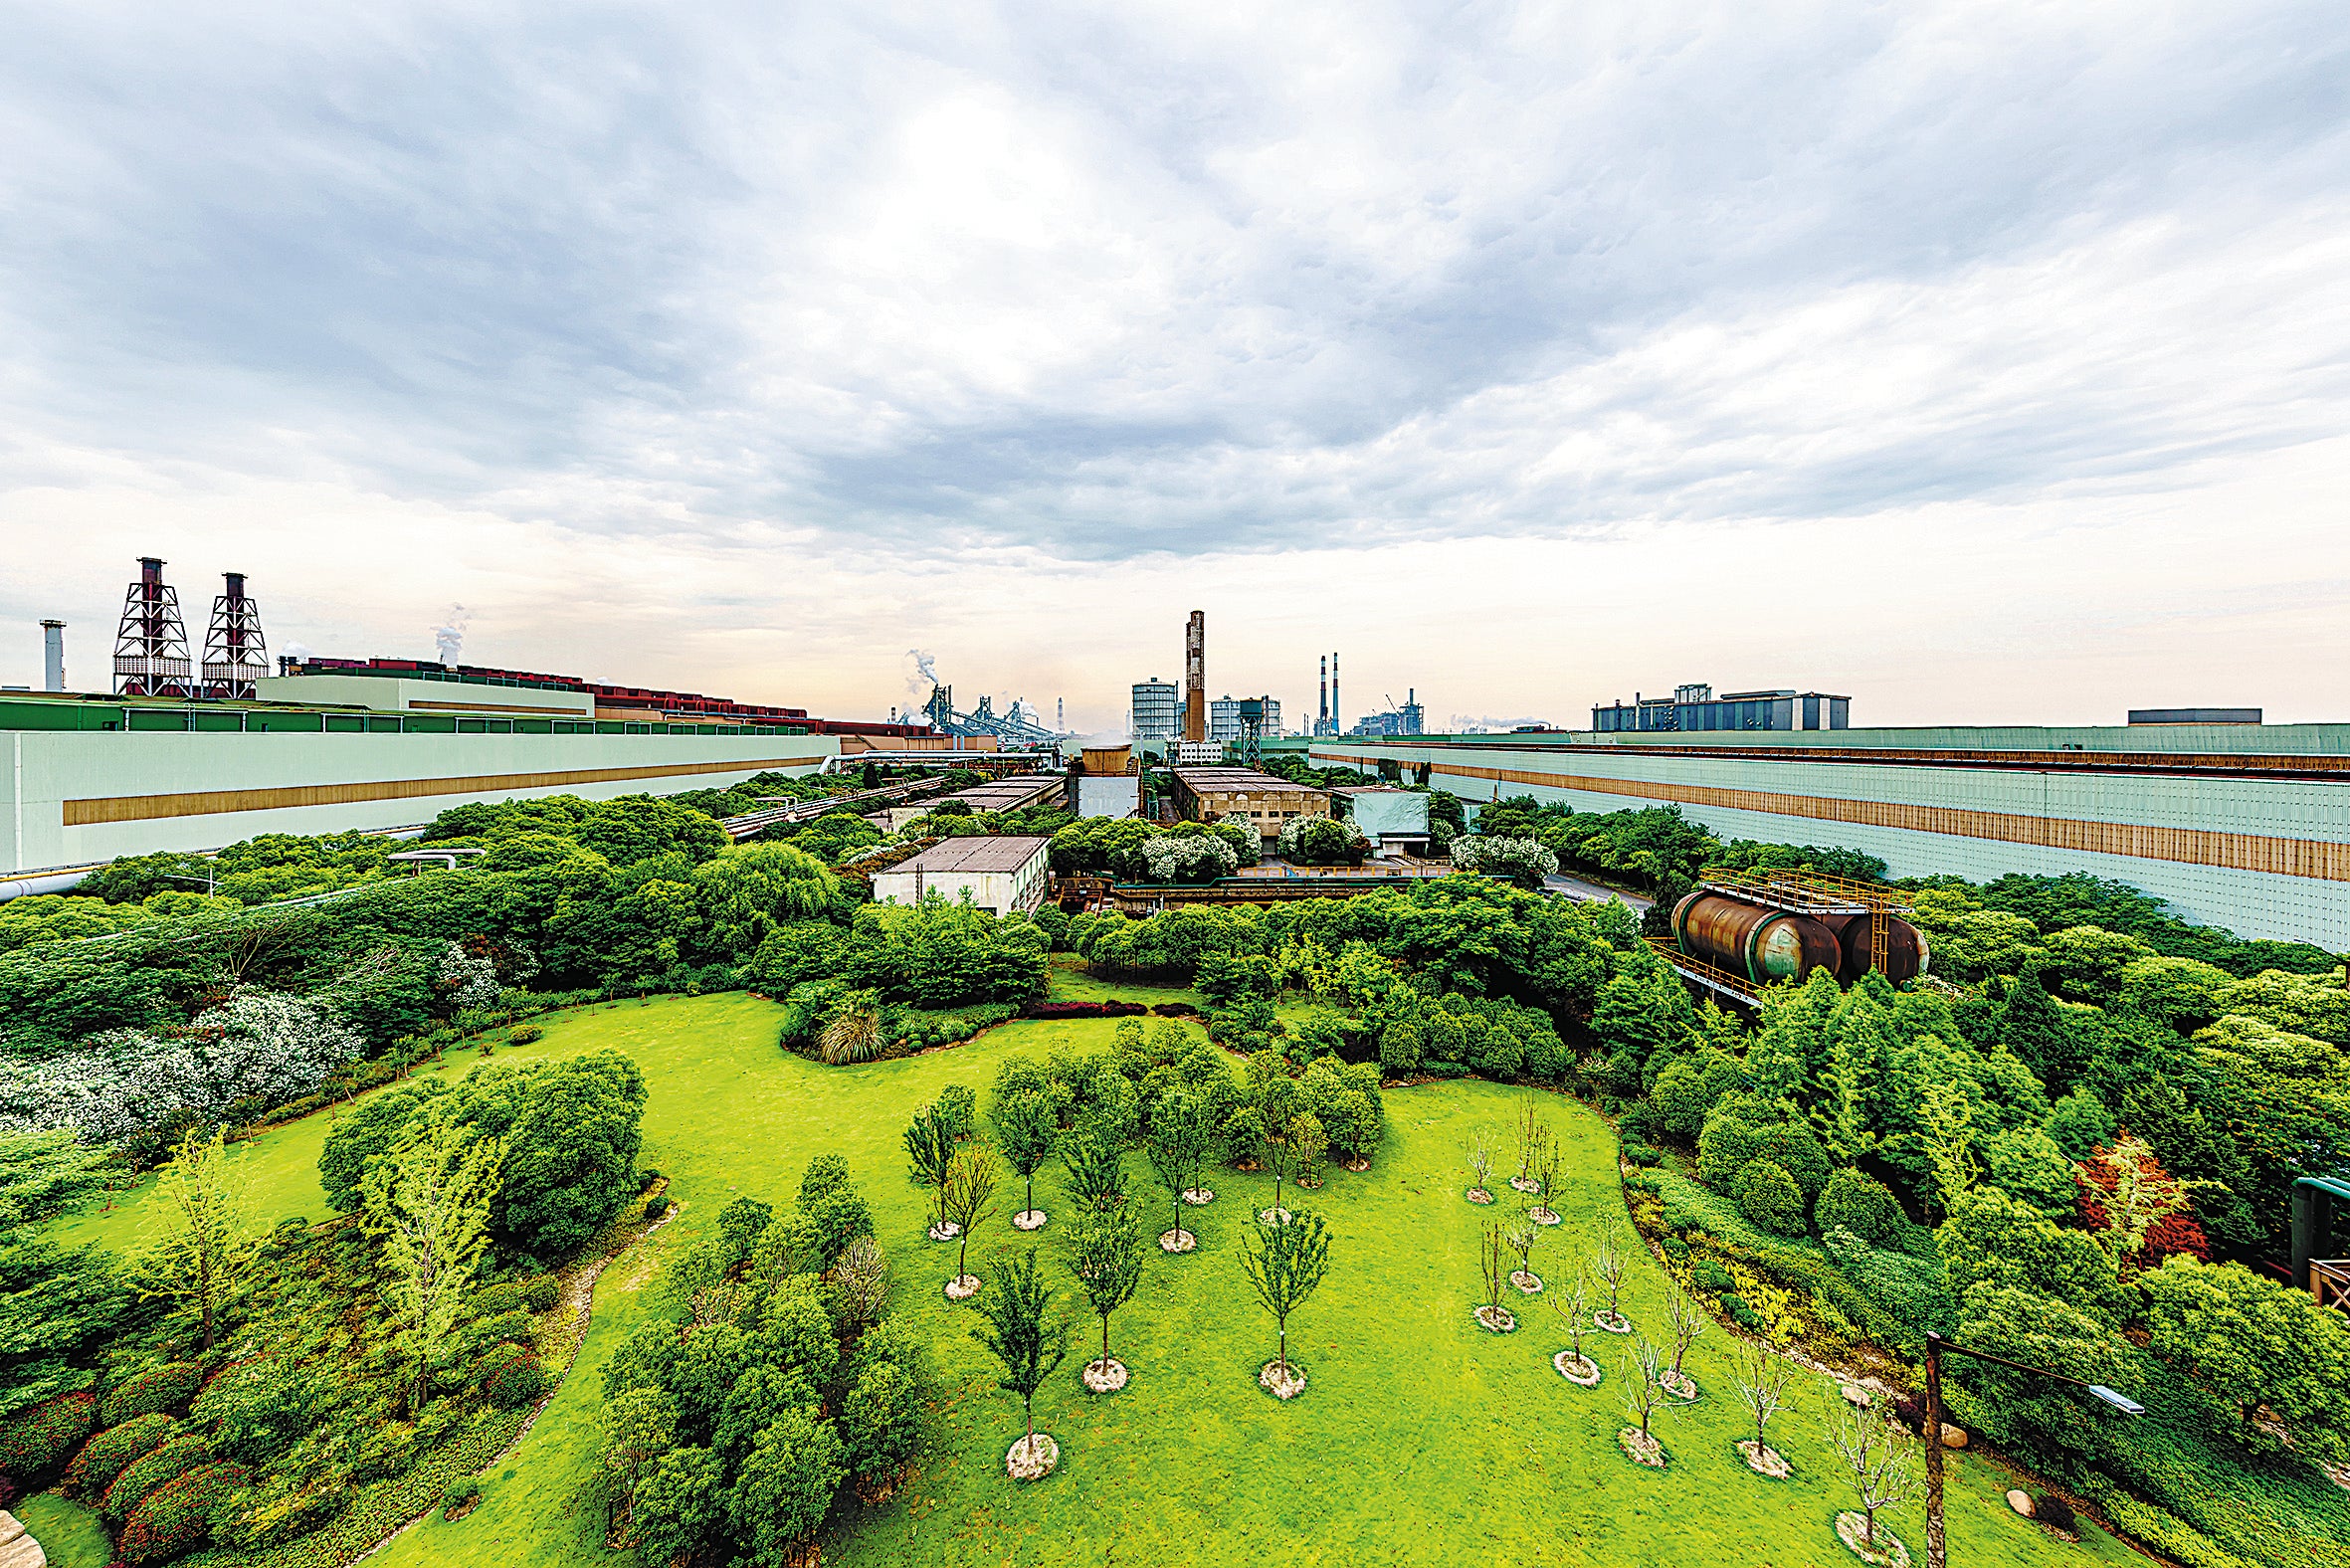 Baoshan Iron & Steel Co in Shanghai has made great efforts to turn its production base into a model of low-carbon development